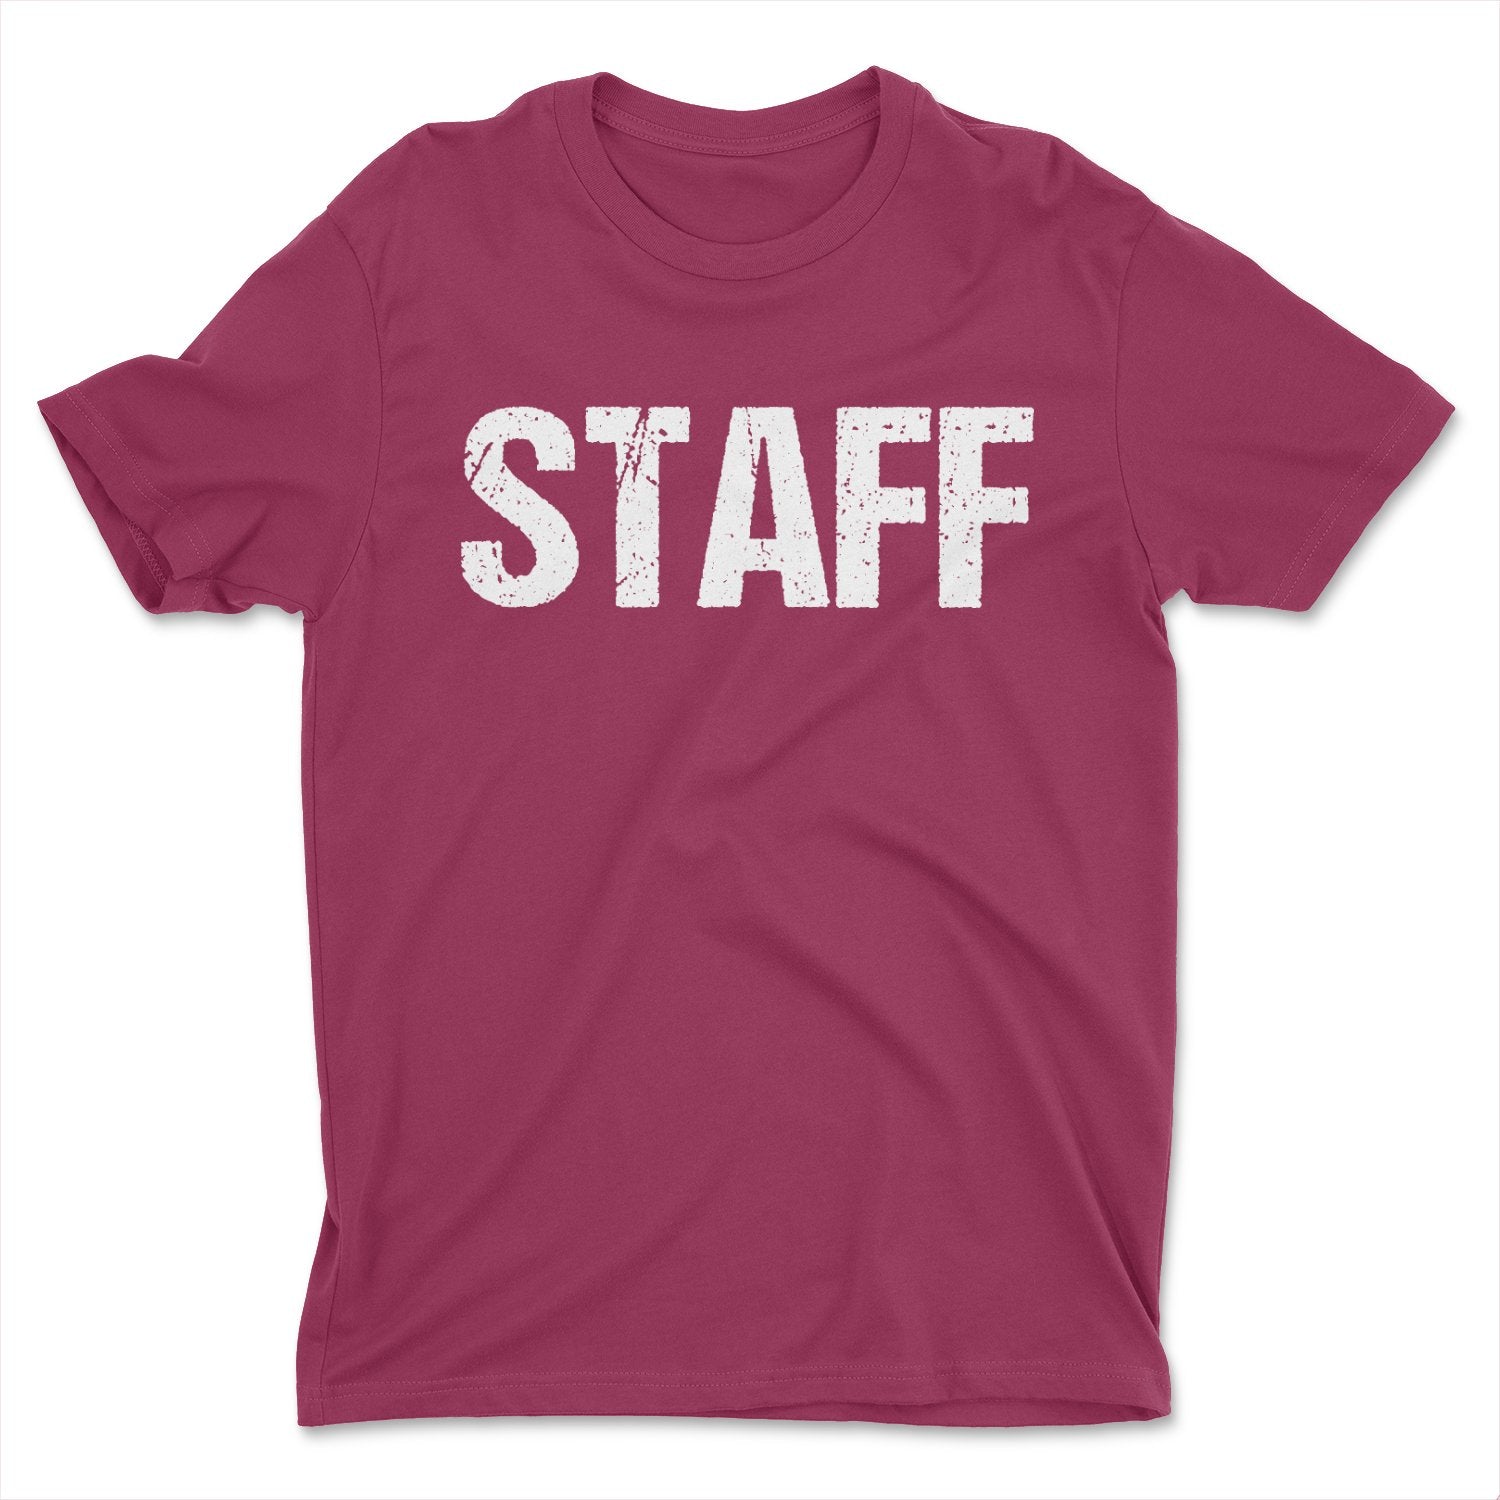 Staff T-Shirt Screen Printed Front & Back Men's Unisex Style (Maroon/White, Distressed)